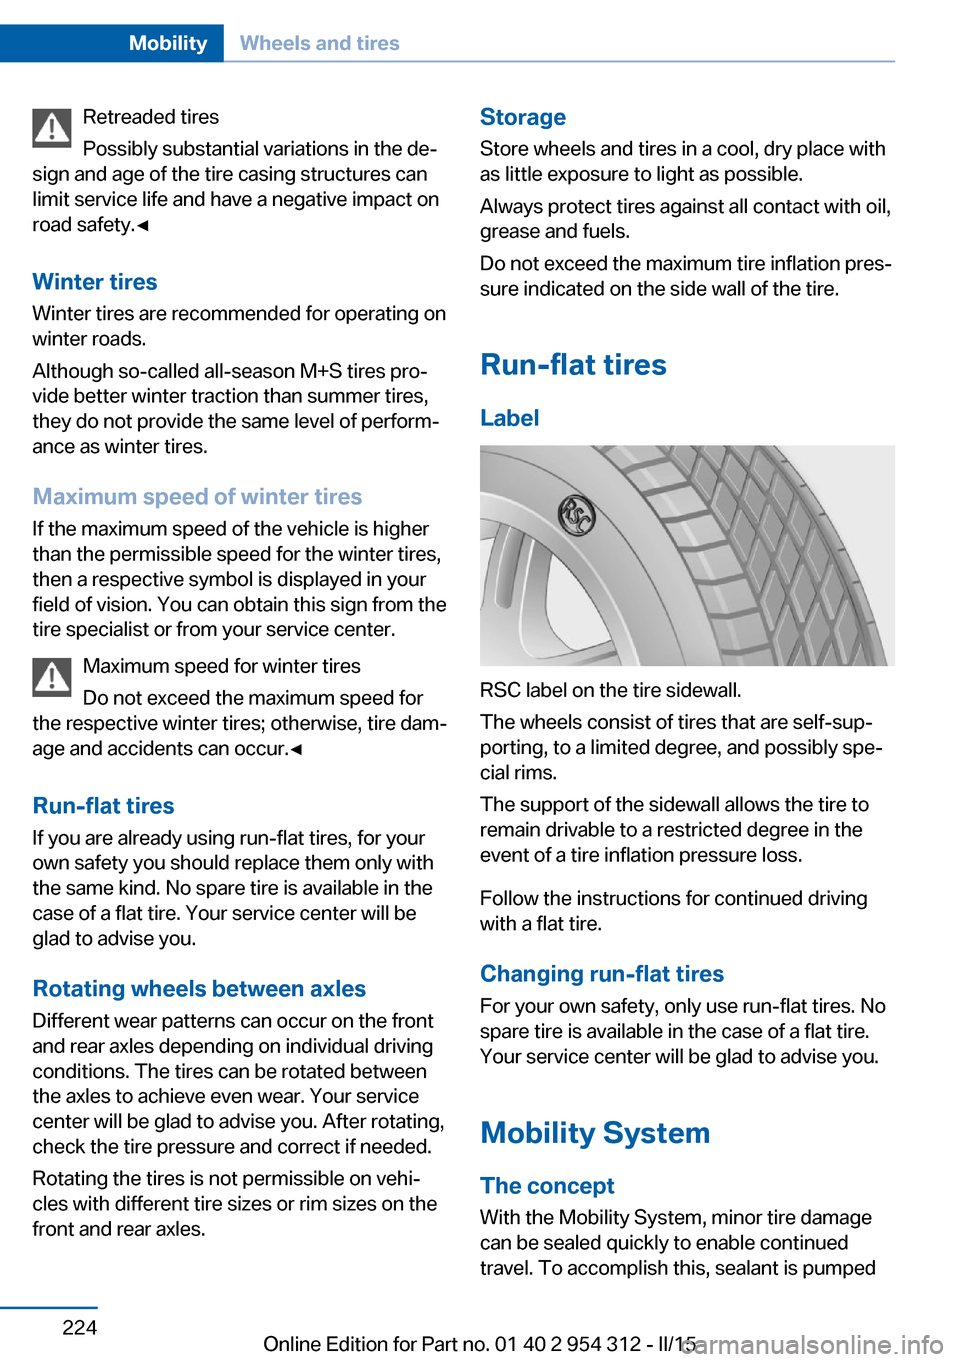 BMW 5 SERIES 2015 F10 User Guide Retreaded tires
Possibly substantial variations in the de‐
sign and age of the tire casing structures can
limit service life and have a negative impact on
road safety.◀
Winter tires
Winter tires a